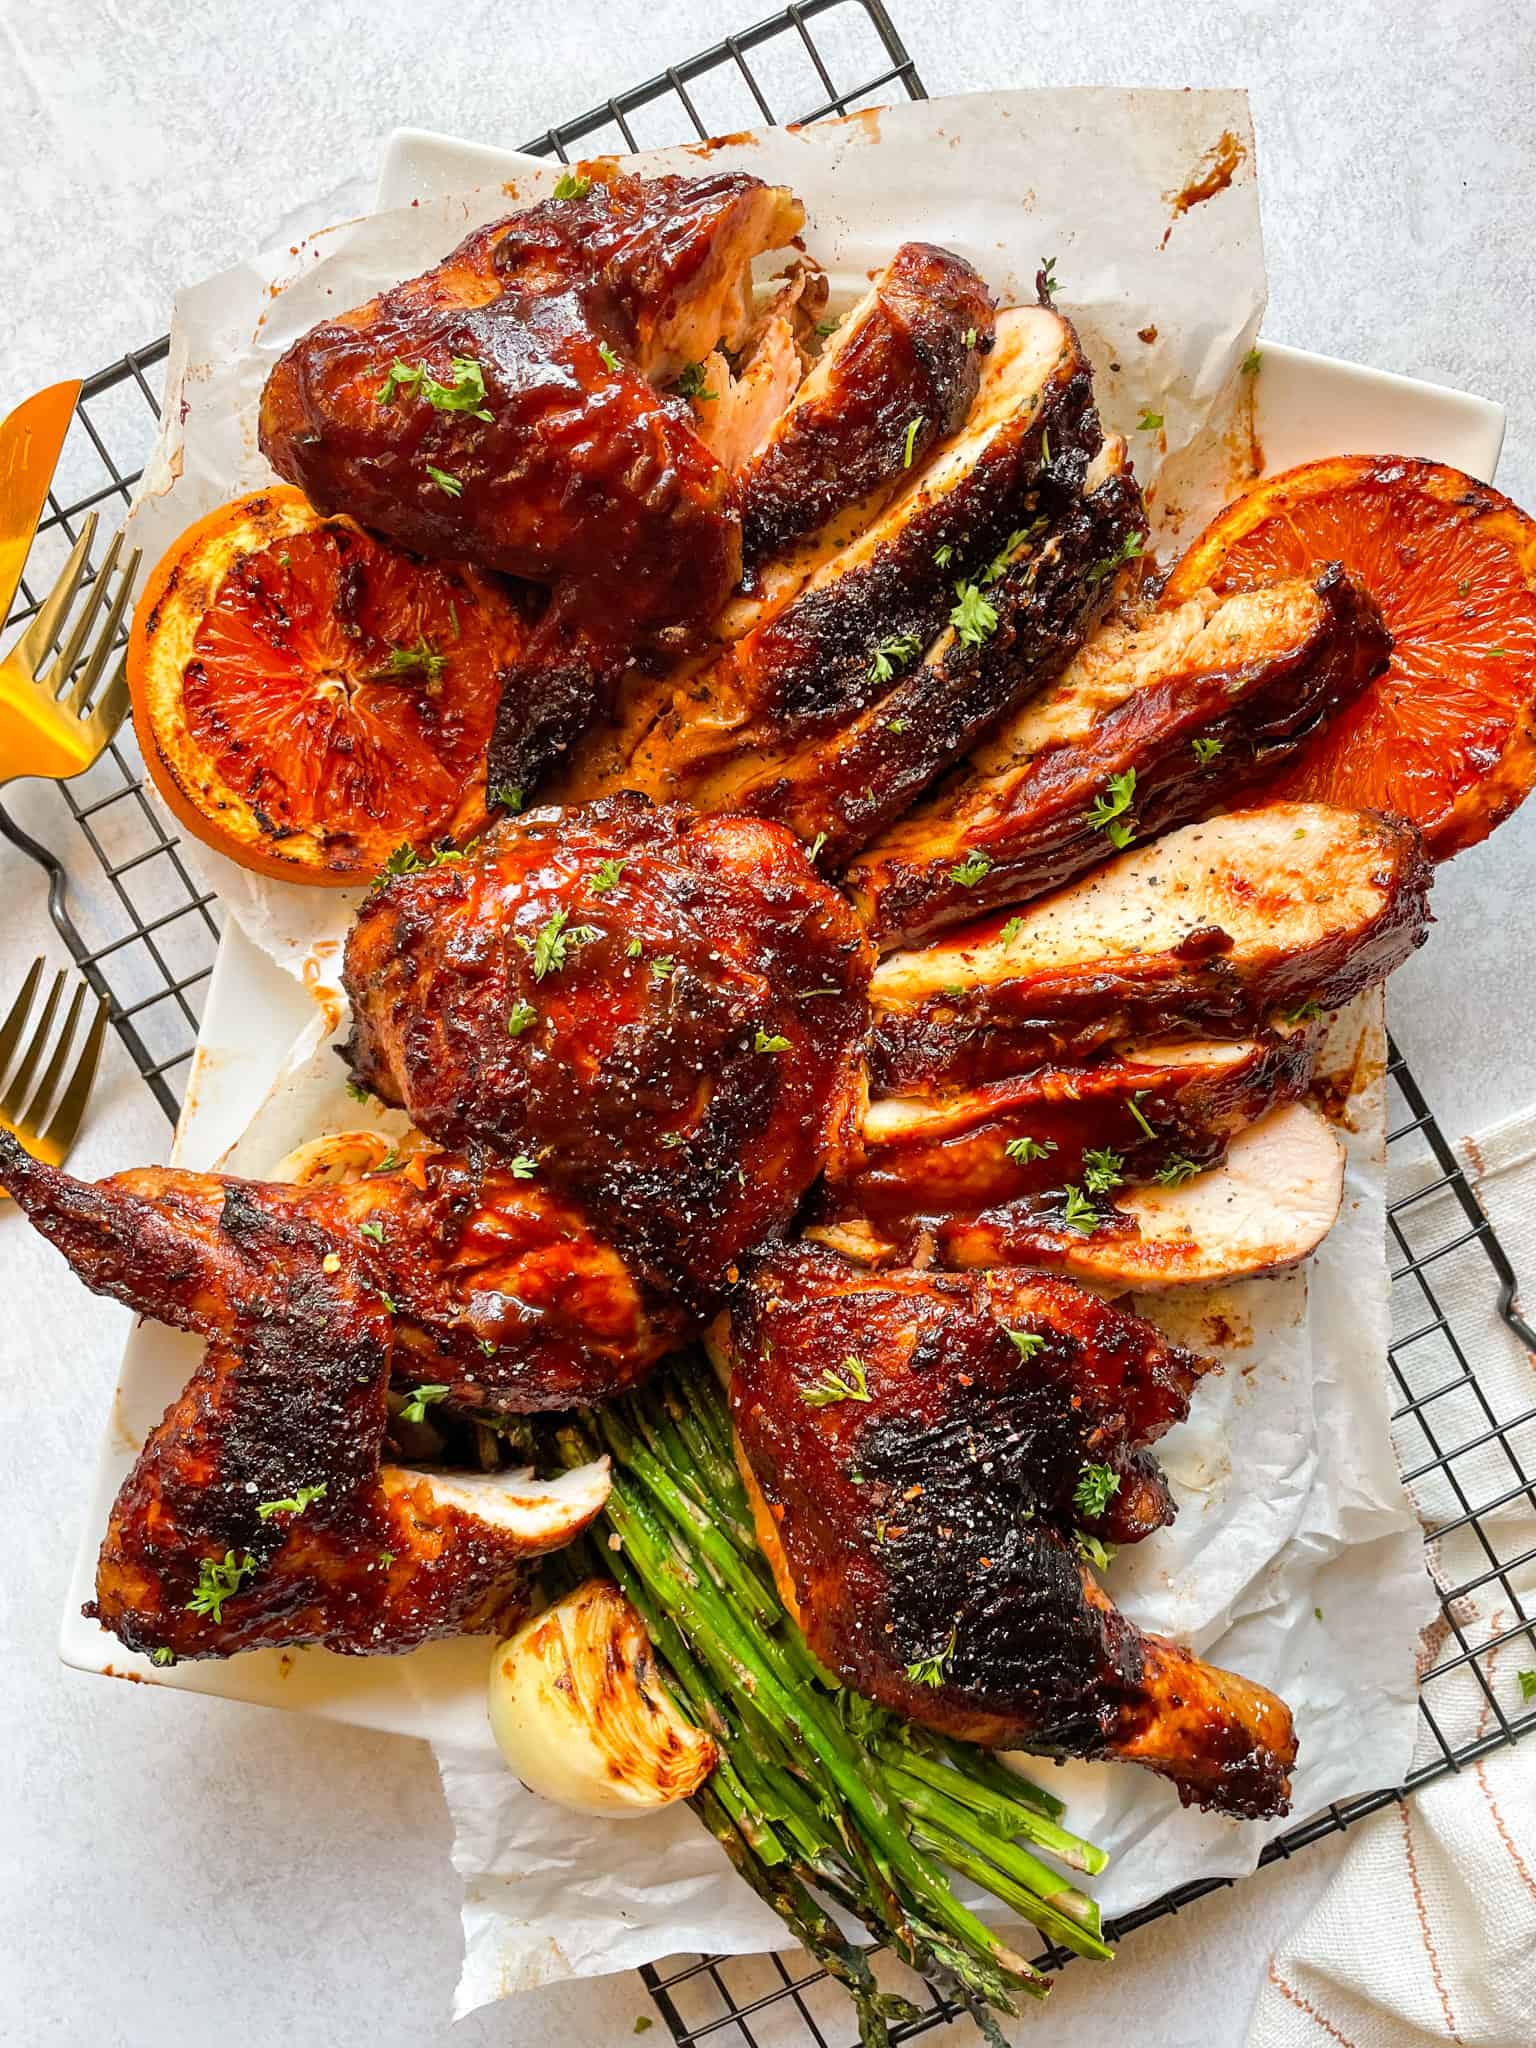 Grilled Spatchcock Chicken (Grilled Whole Chicken)